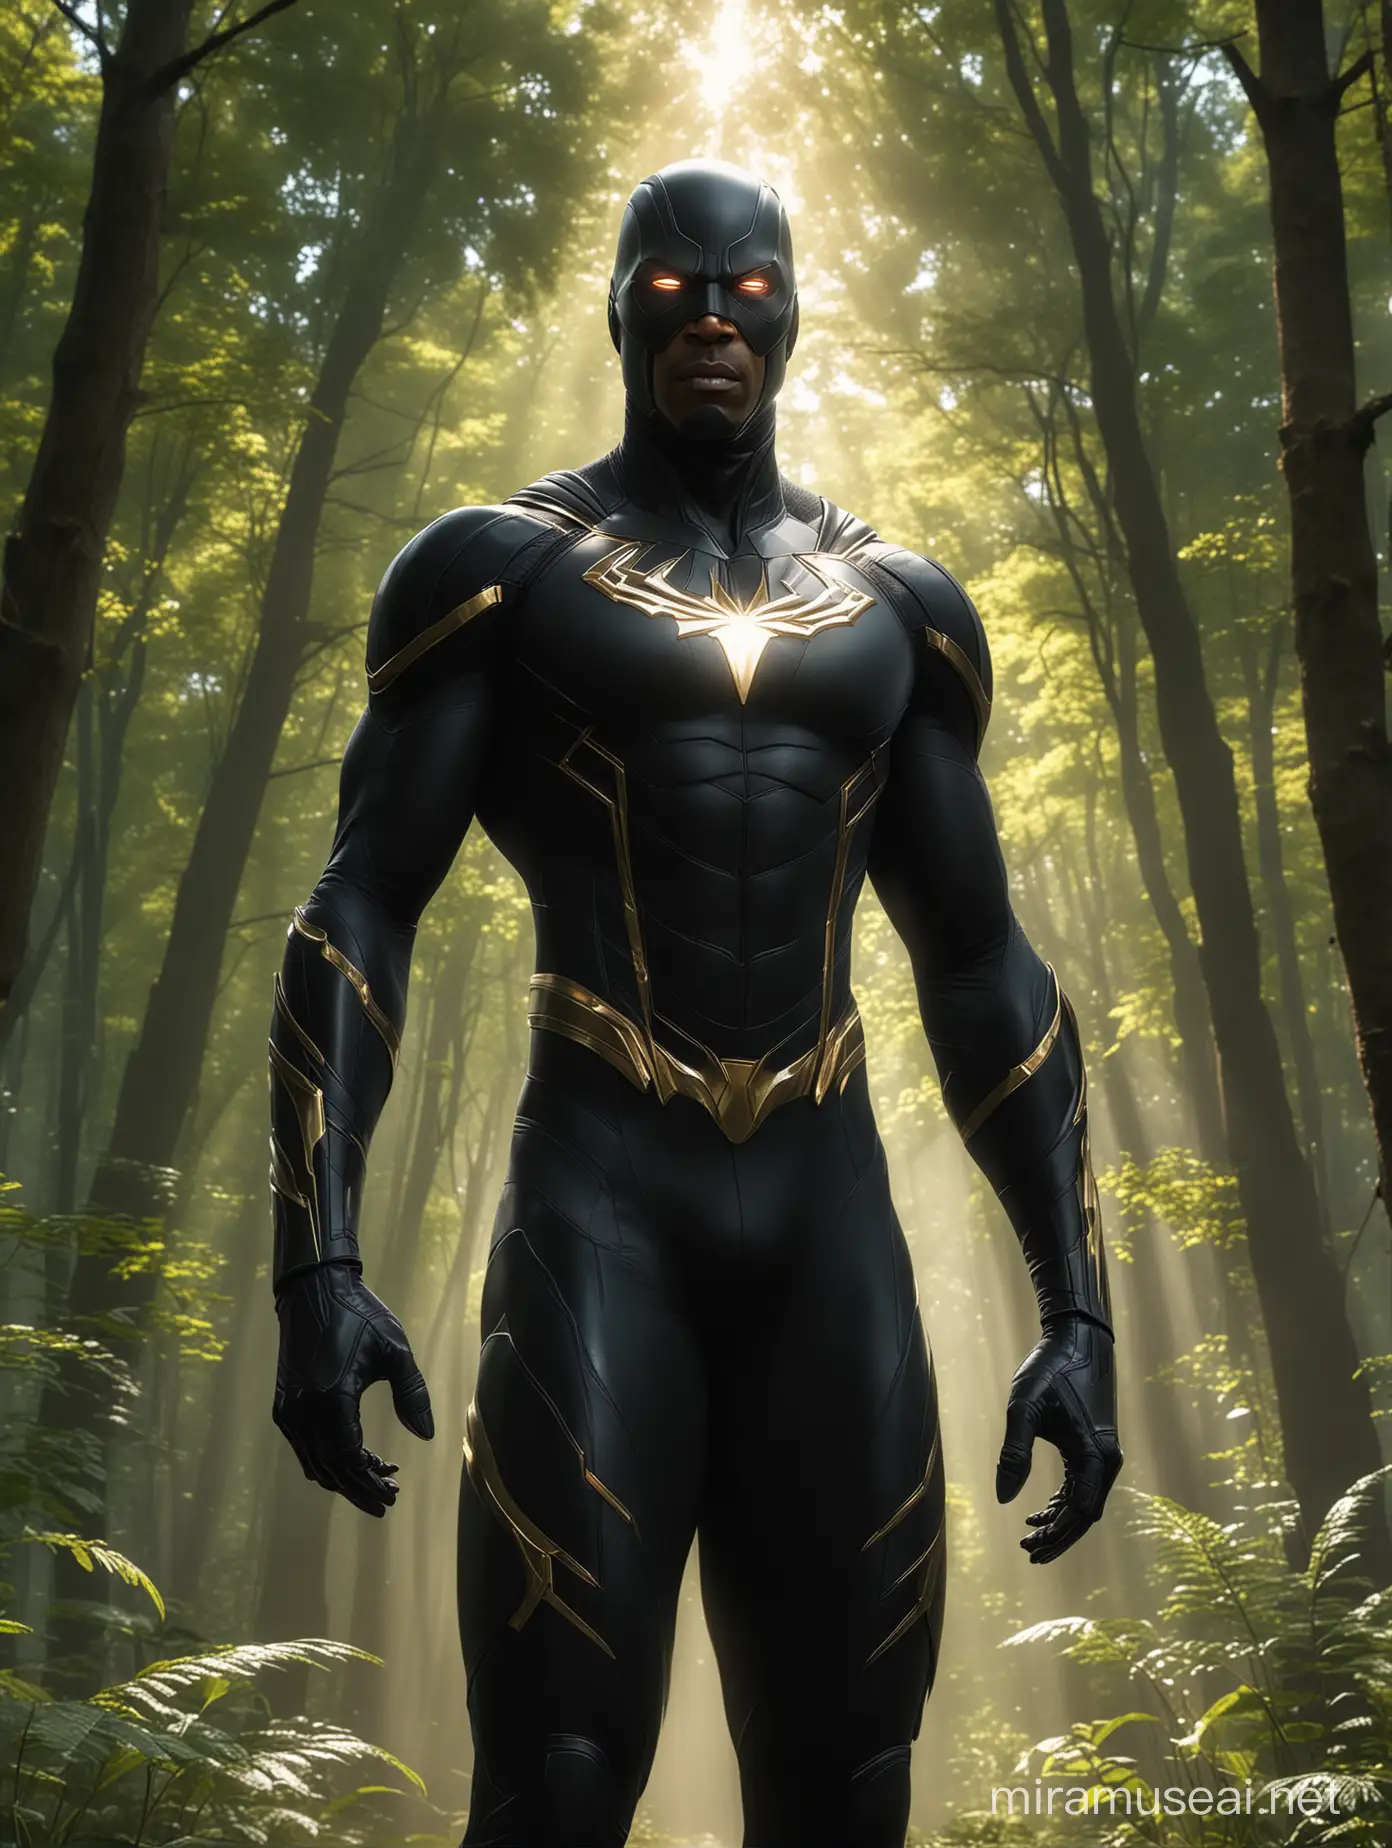 Vision Superhero Emerges from Woods in Cinematic Setting